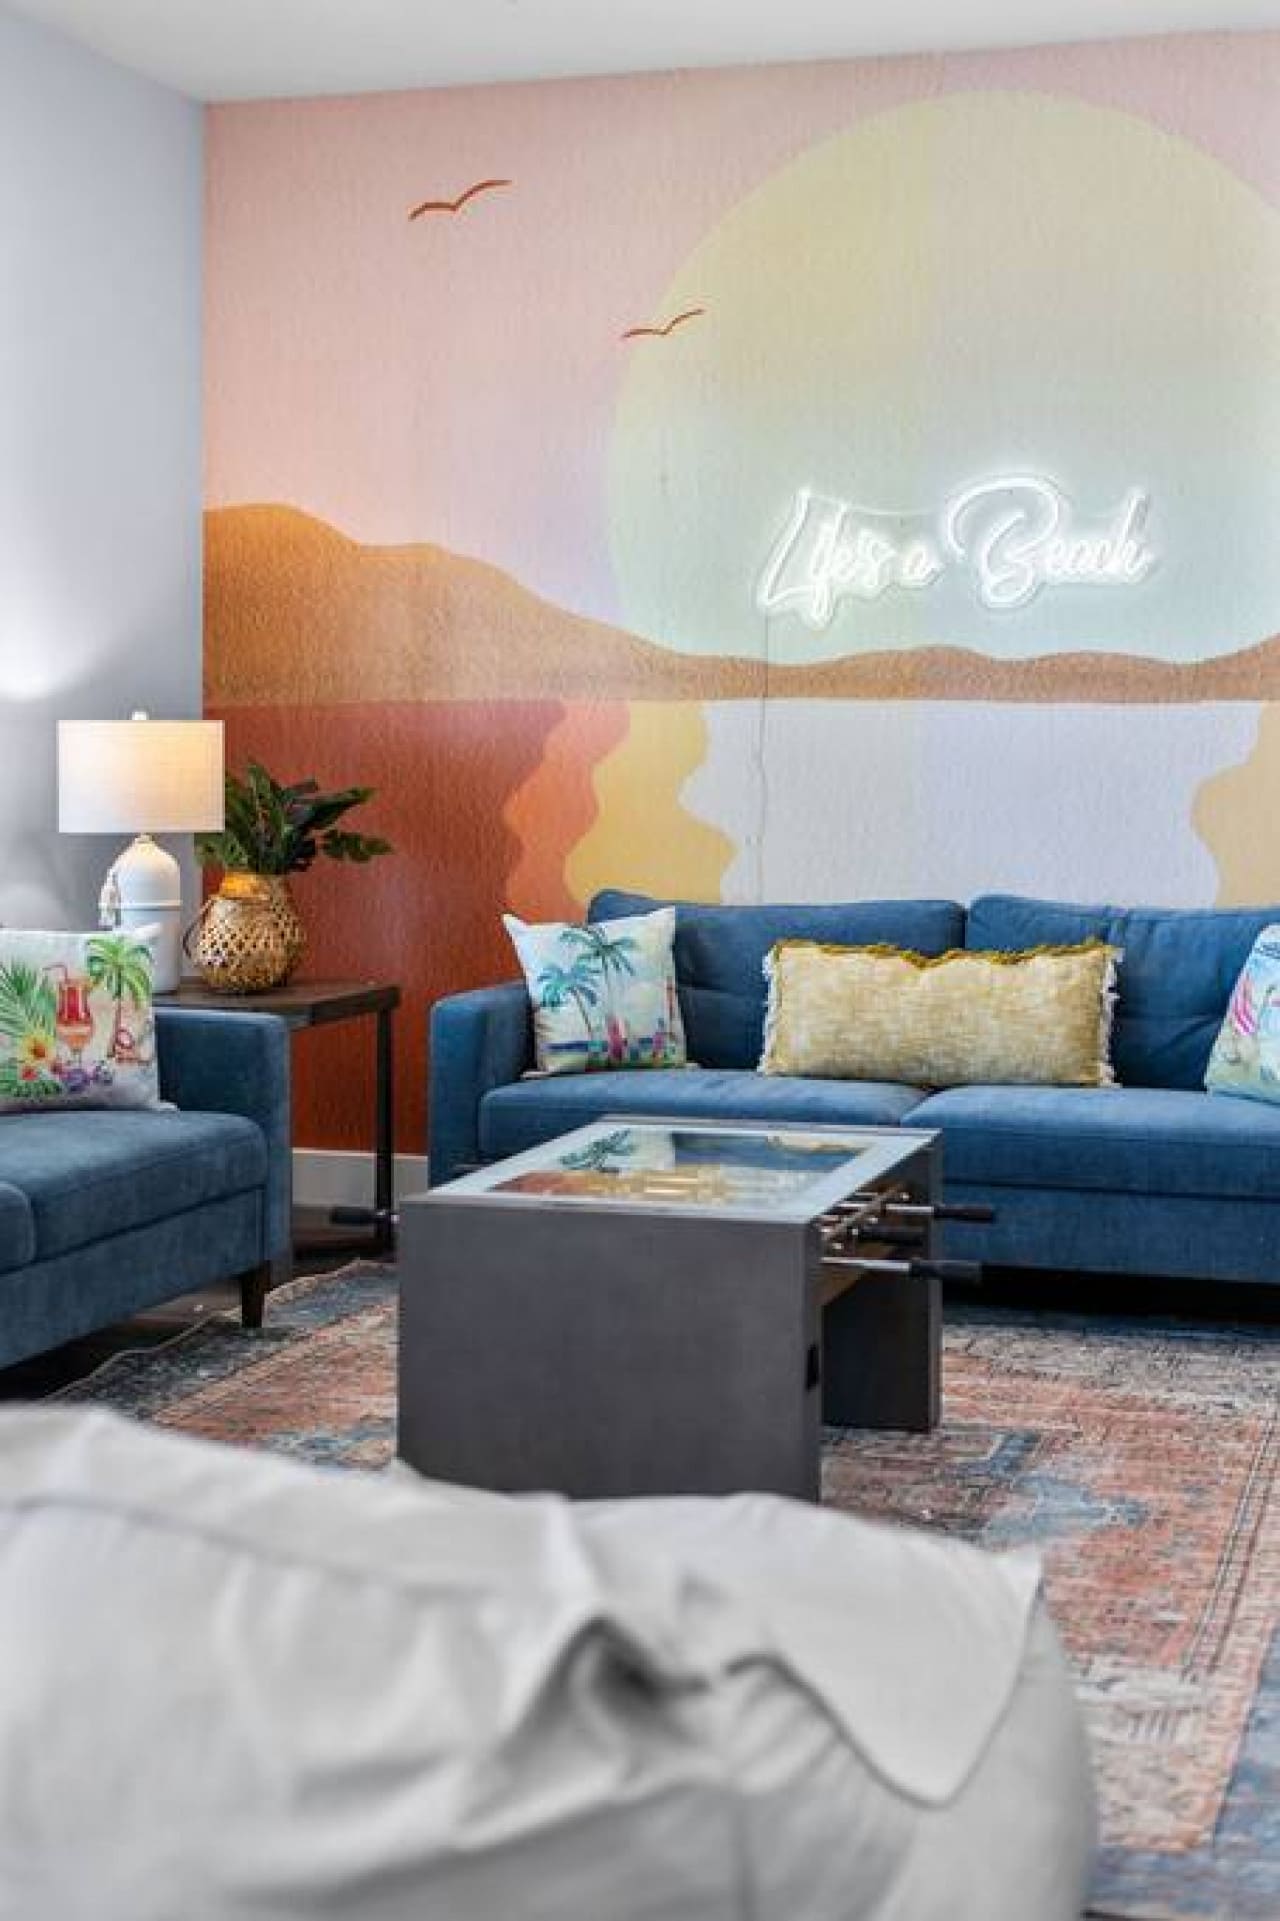 A serene beach-inspired Airbnb interior design with 'Lyra Beach' neon sign and sunset wall mural.